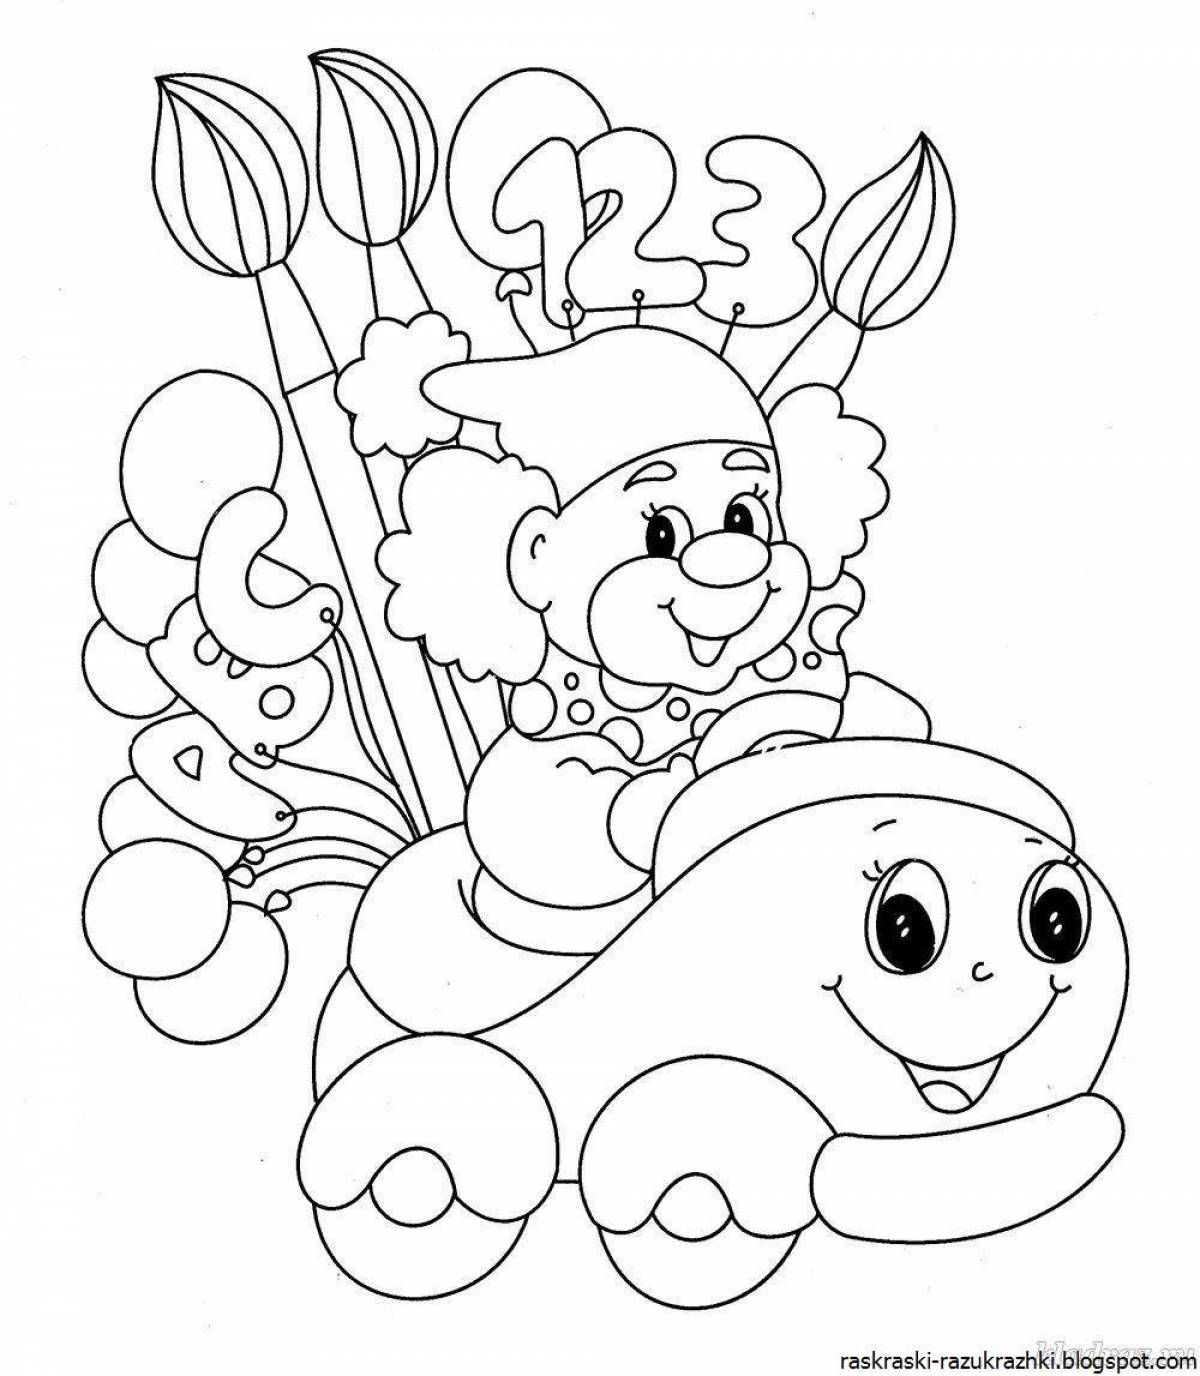 Joyful coloring book for children 6-7 years old